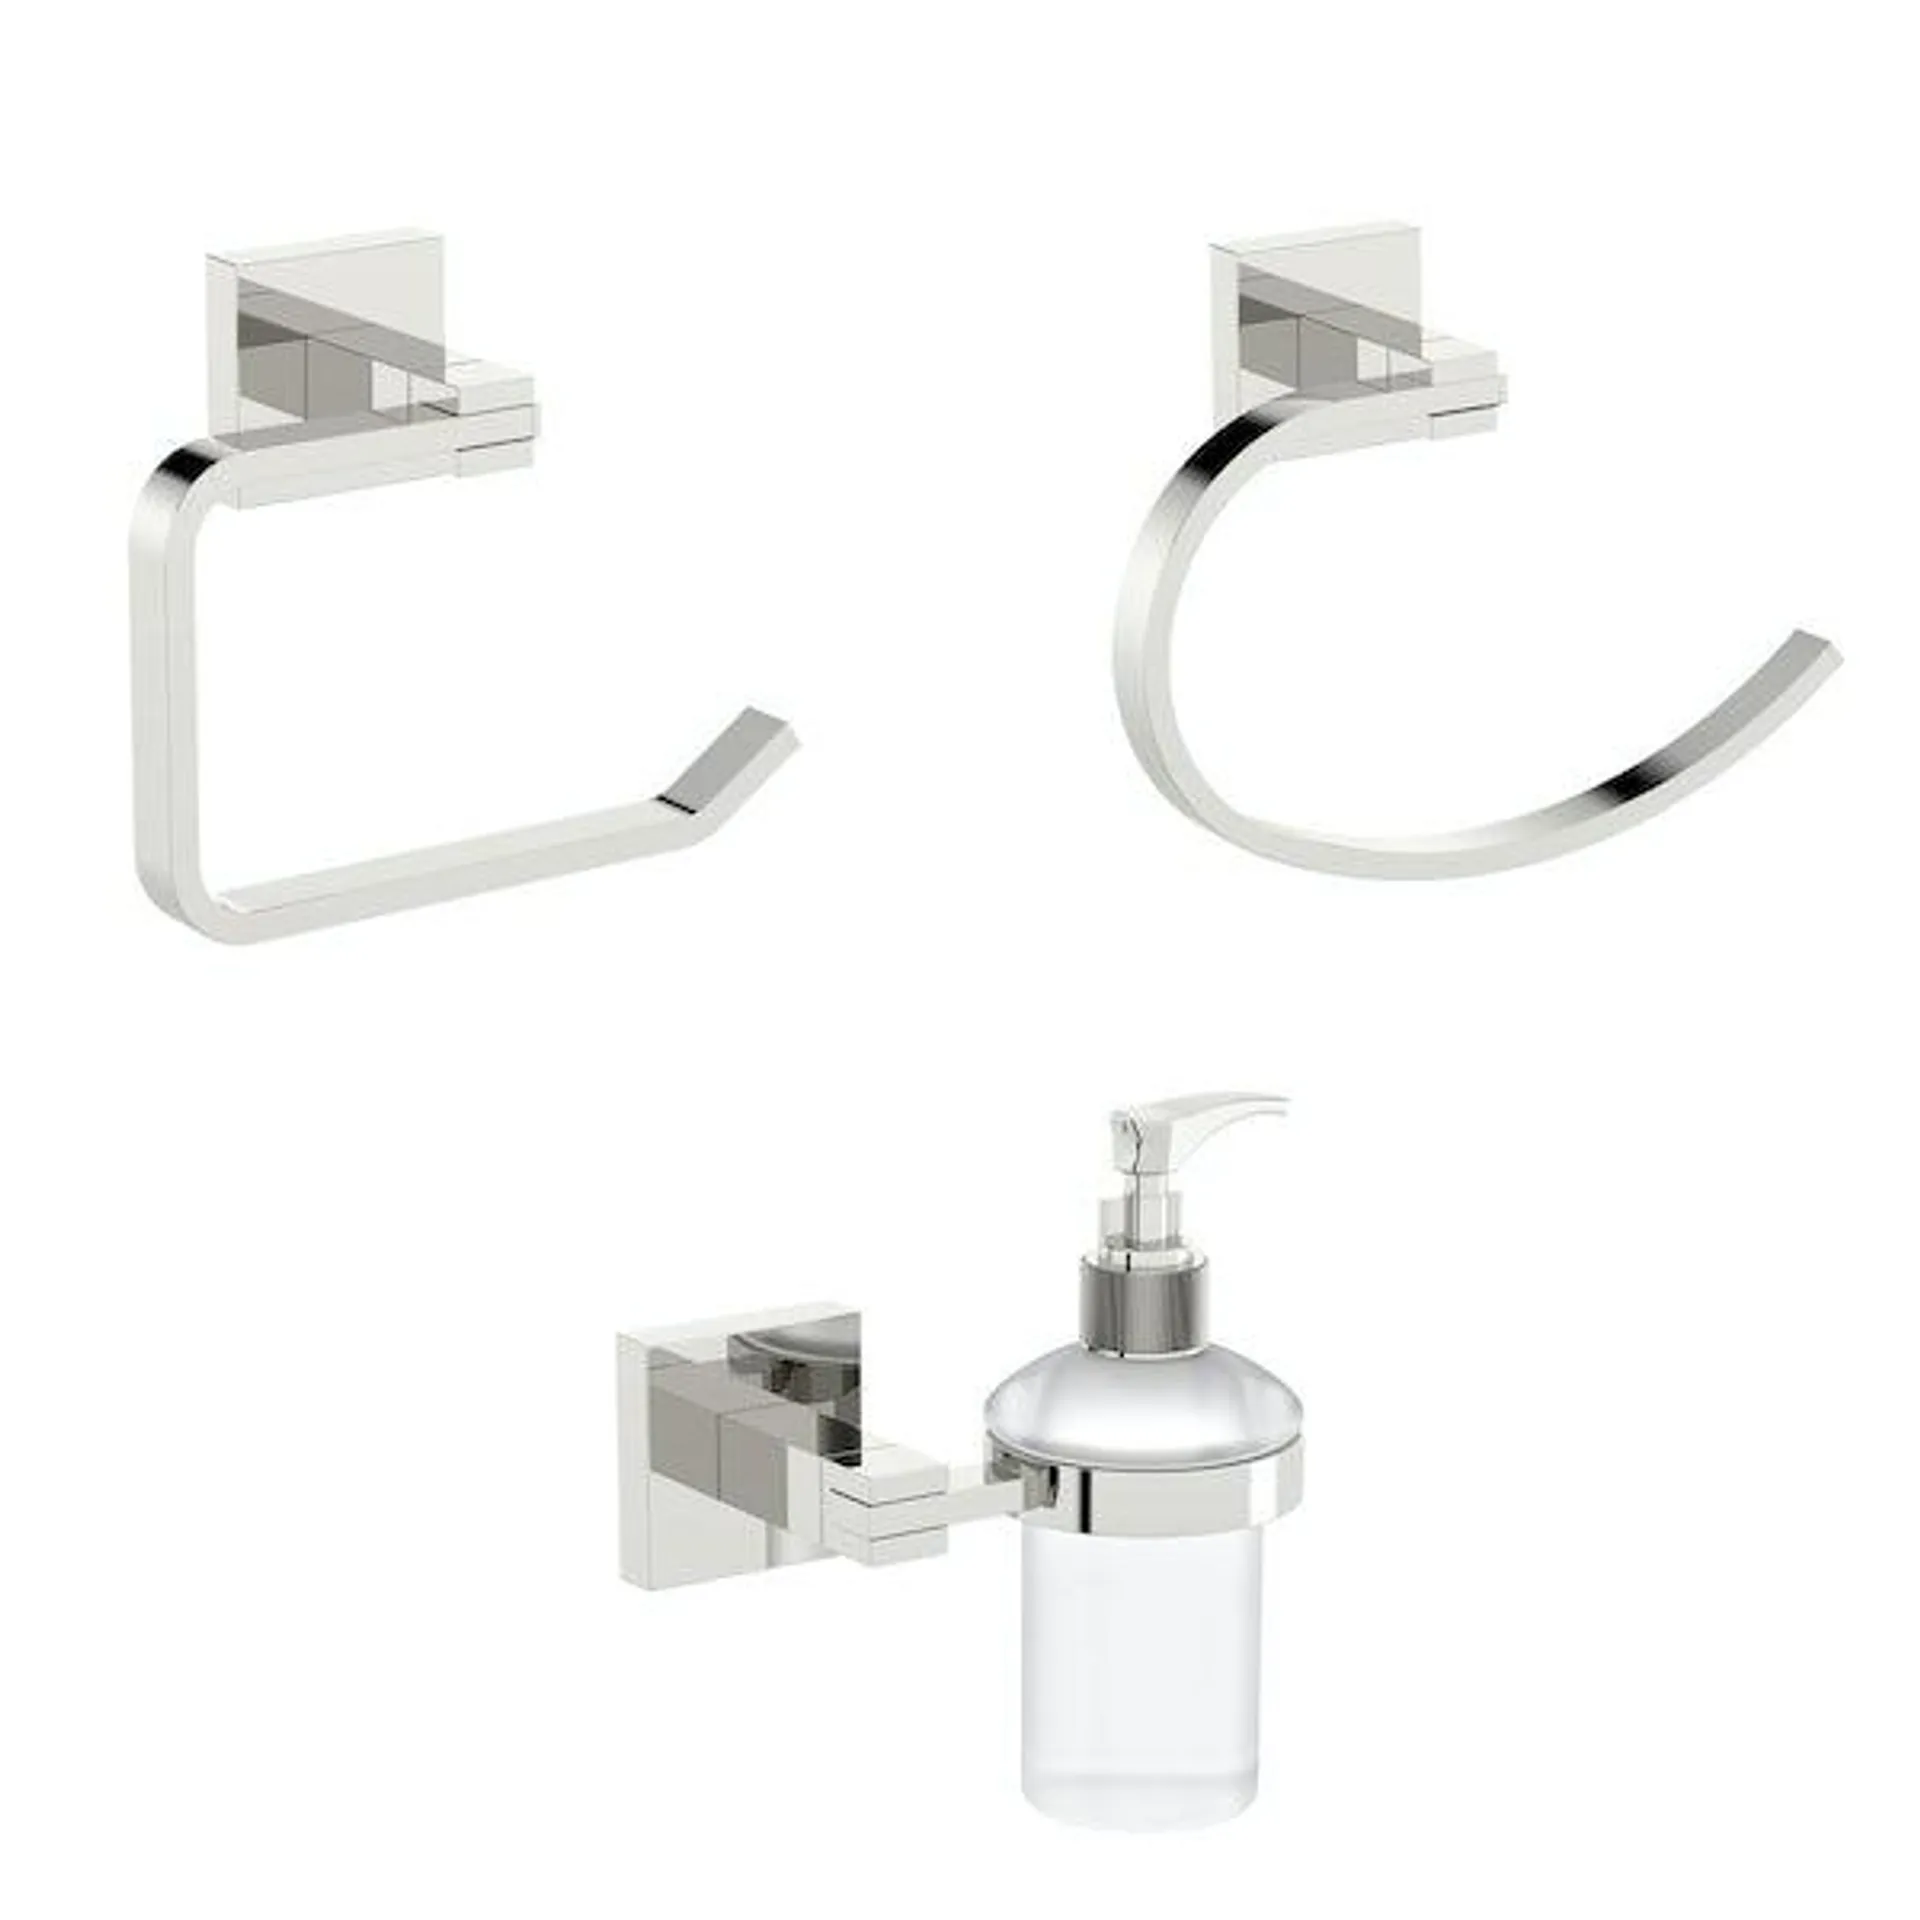 Accents Wye square cloak room 3 piece accessory set